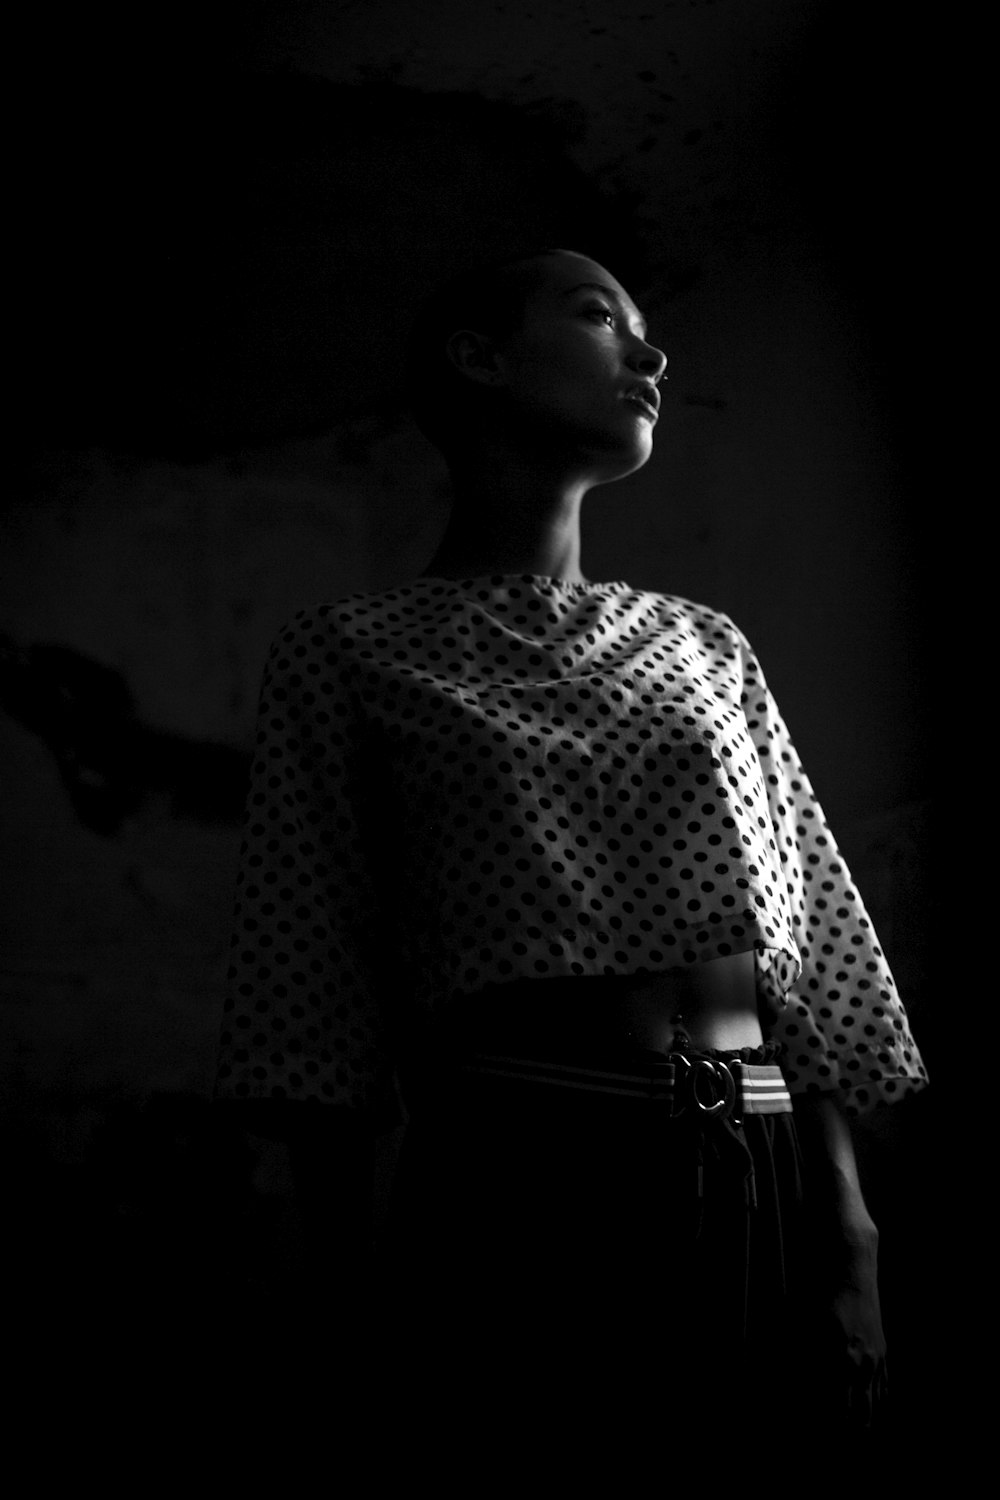 low-angle photo of woman wearing black and white polka-dot crop standing in the dark room